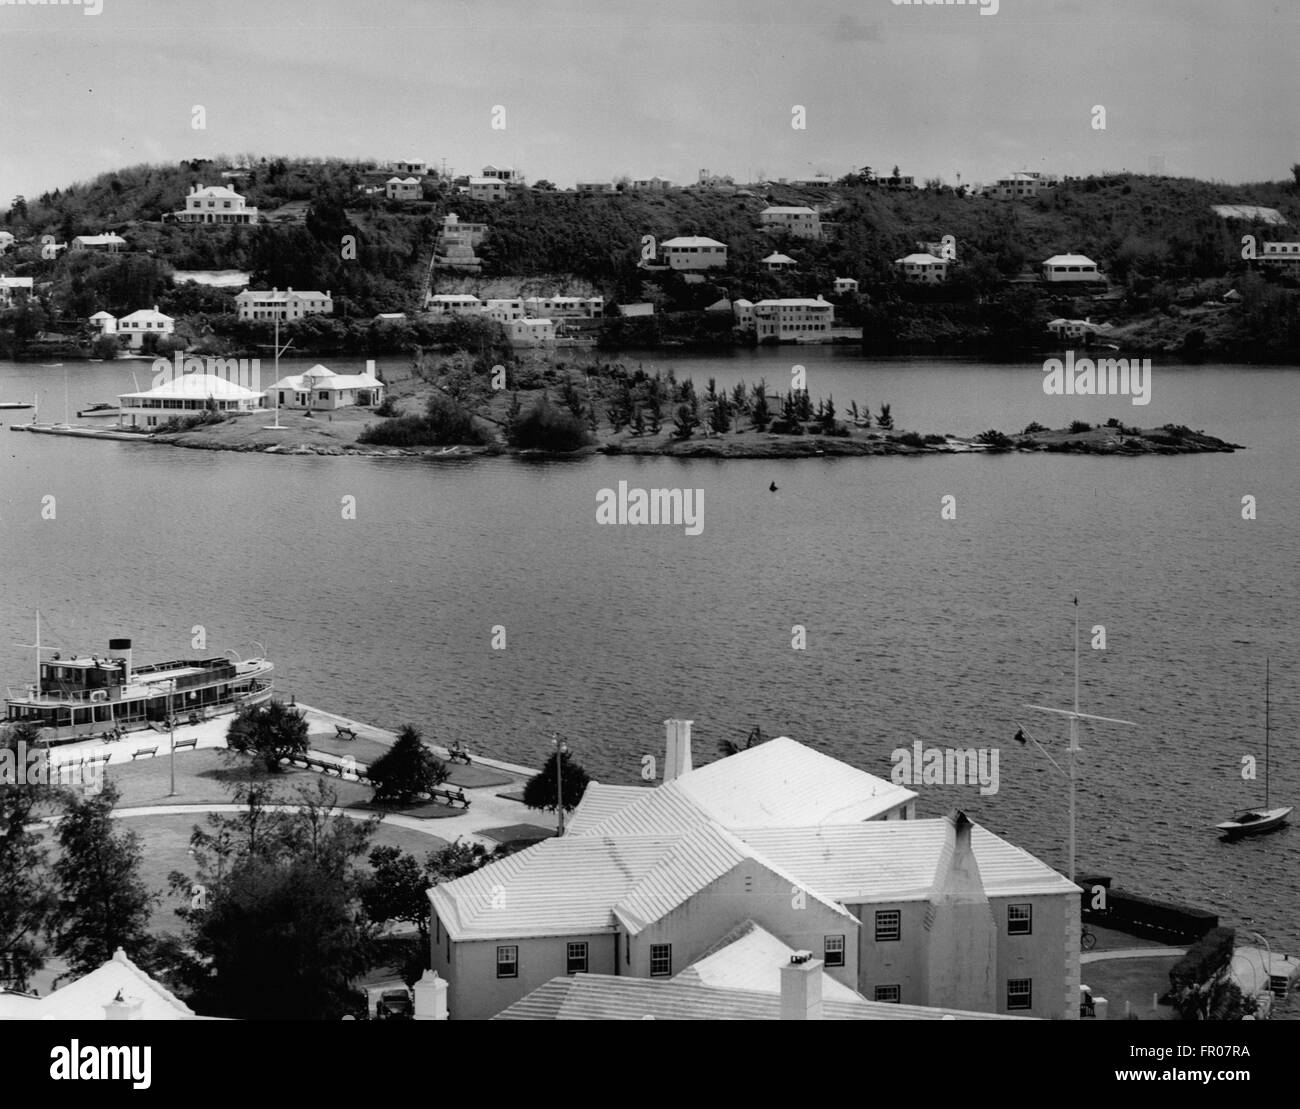 Nov 24, 1953 - Albuoy's Point, Hamilton, Bermuda - On this point of land, members of various youth organizations will assemble to hear an address by Her Majesty Queen Elizabeth II during her visit with his Royal Highness the Duke of Edinburgh. The building in the right foreground is the Royal Bermuda Yacht Club which will be honored by a visit by the Royal Couple where the Queen will sign the guest book. The yacht Wilhelmina which will take the Royal Party on a cruise through the islands of the Great Sound before they disembark at Mangrove Bay Wharf, in the Western section of the islands, pict Stock Photo